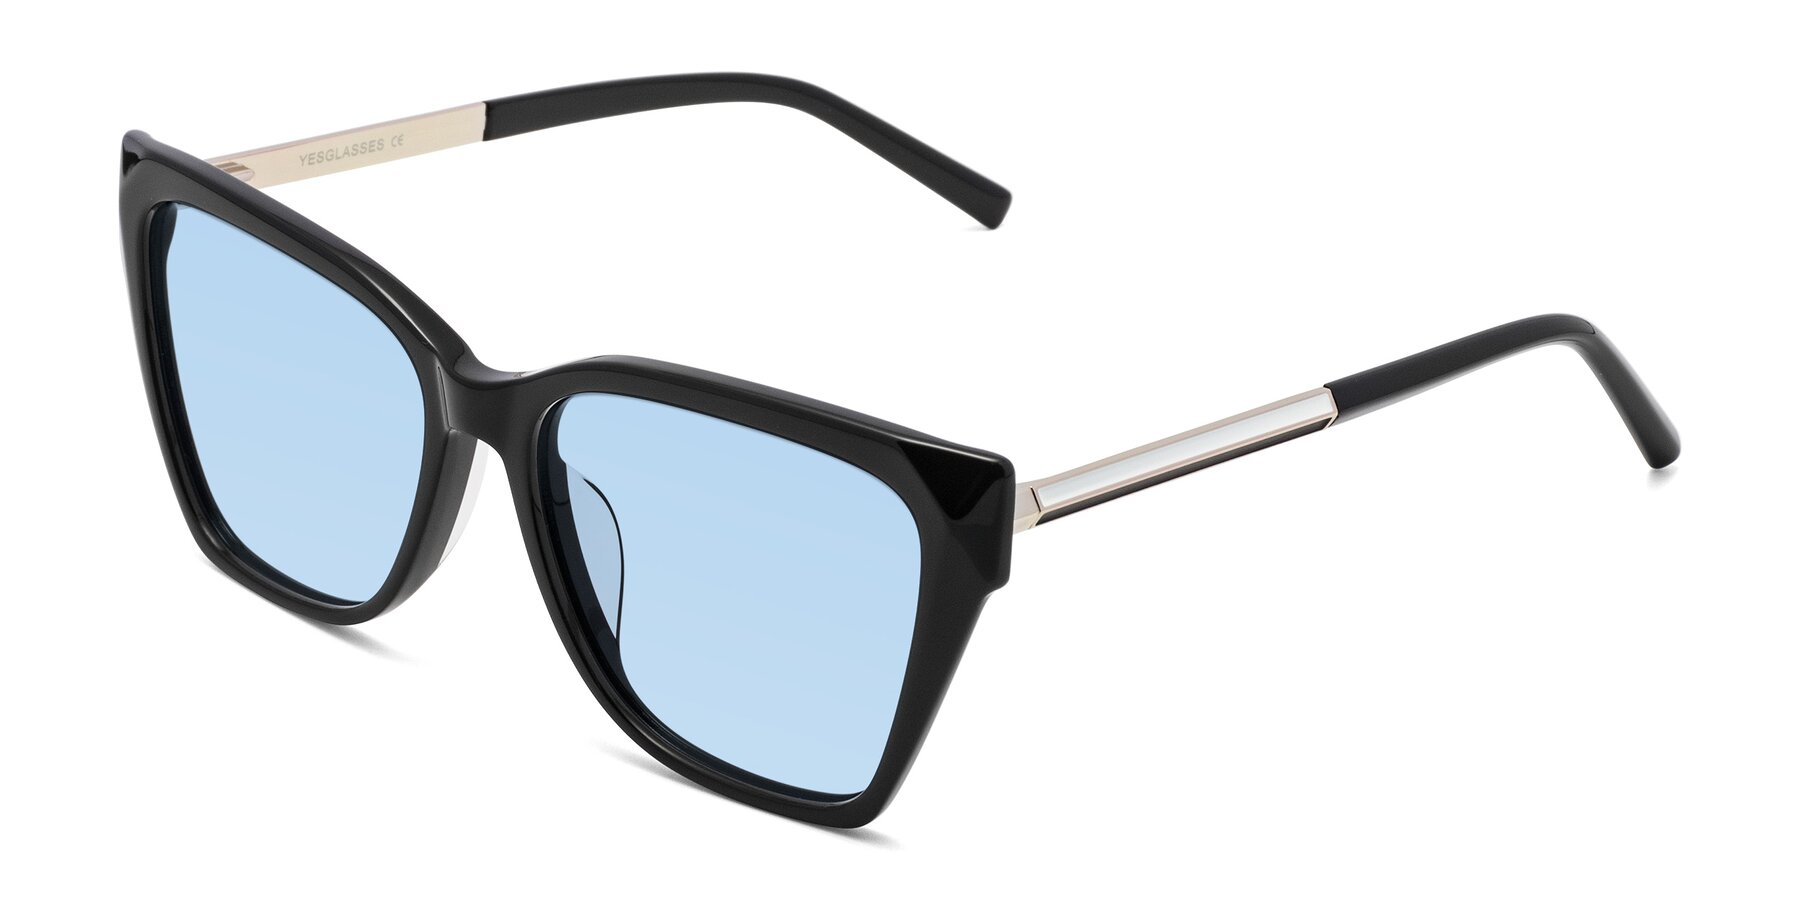 Angle of Swartz in Black with Light Blue Tinted Lenses